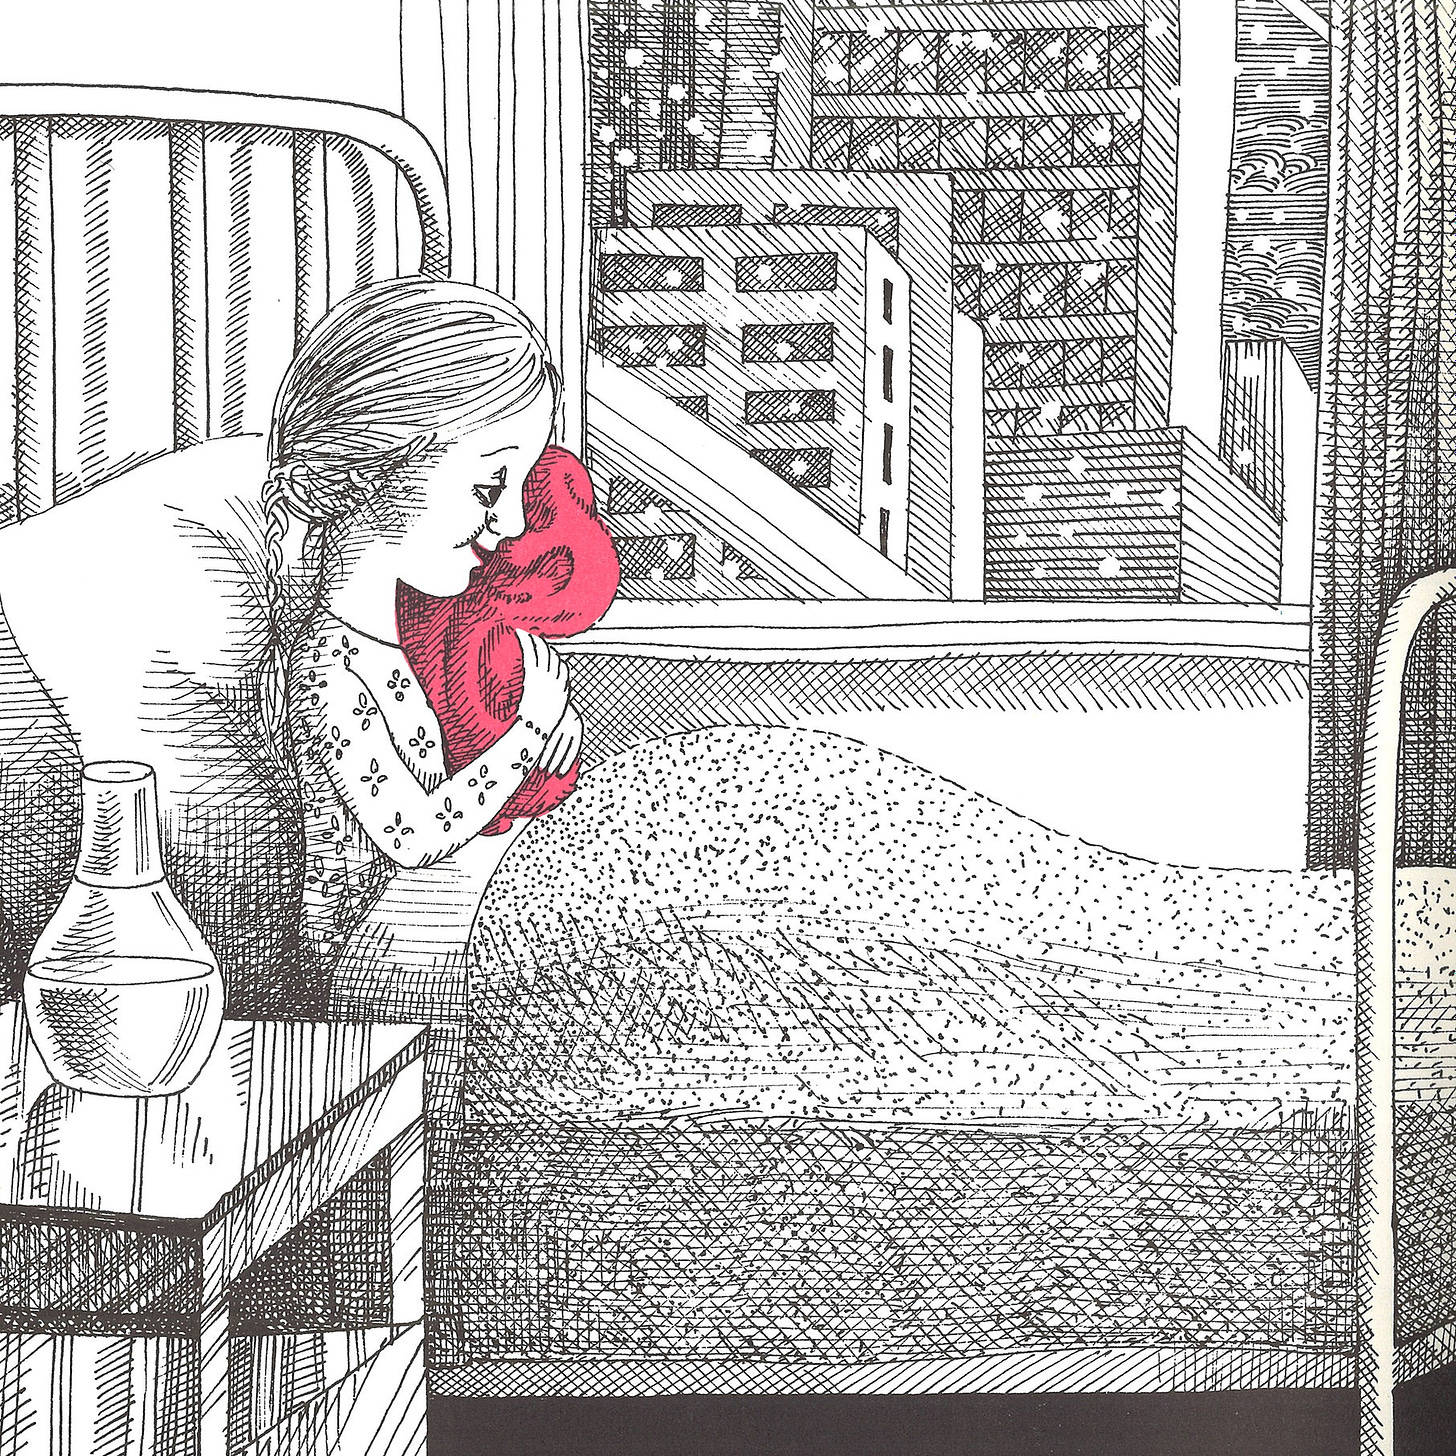 William Goldman's Strange, Sad, Captivating Children's Book About a Girl  and Her Blanket | The New Yorker